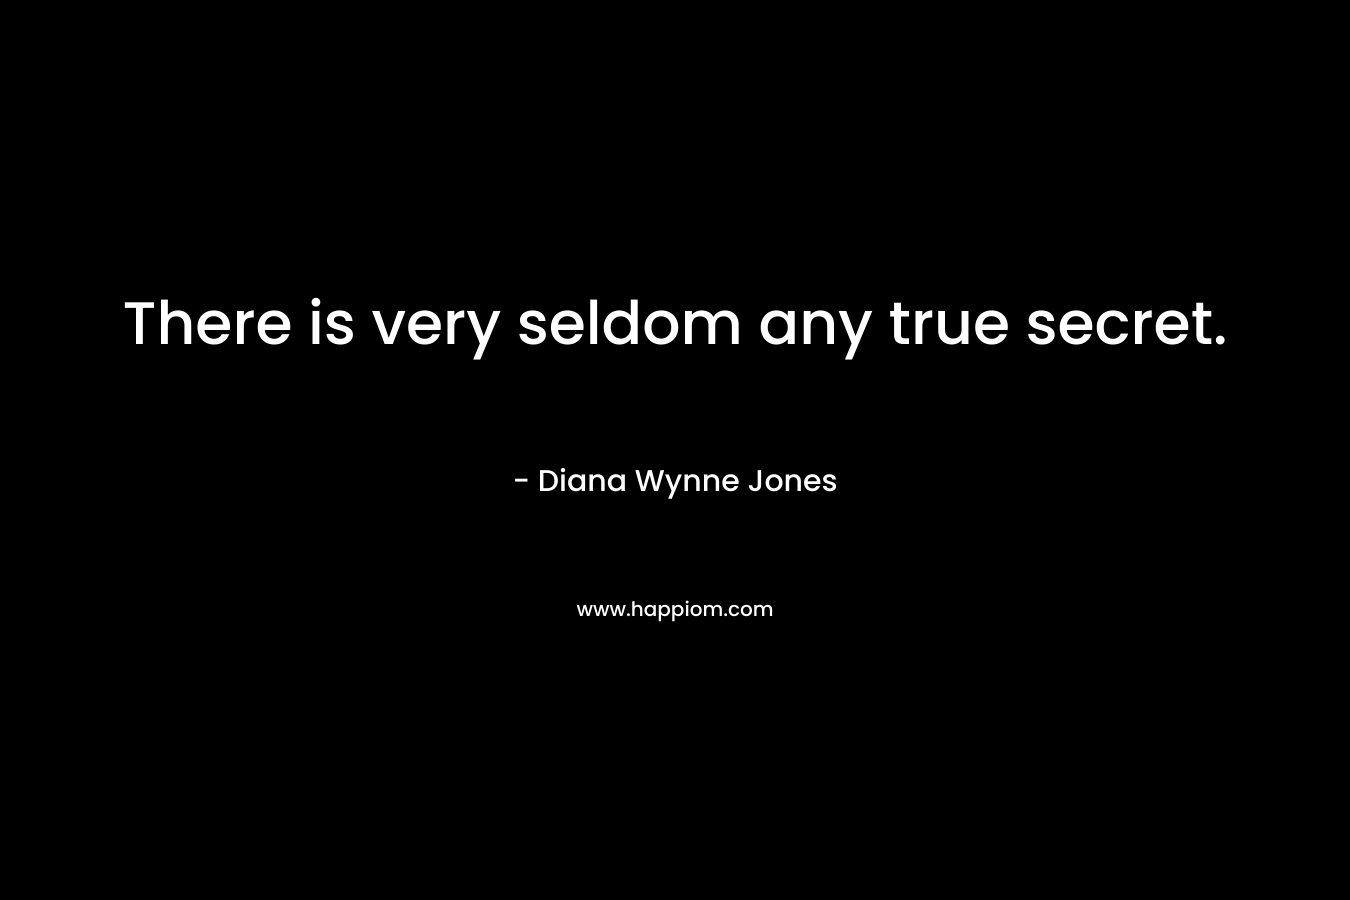 There is very seldom any true secret.